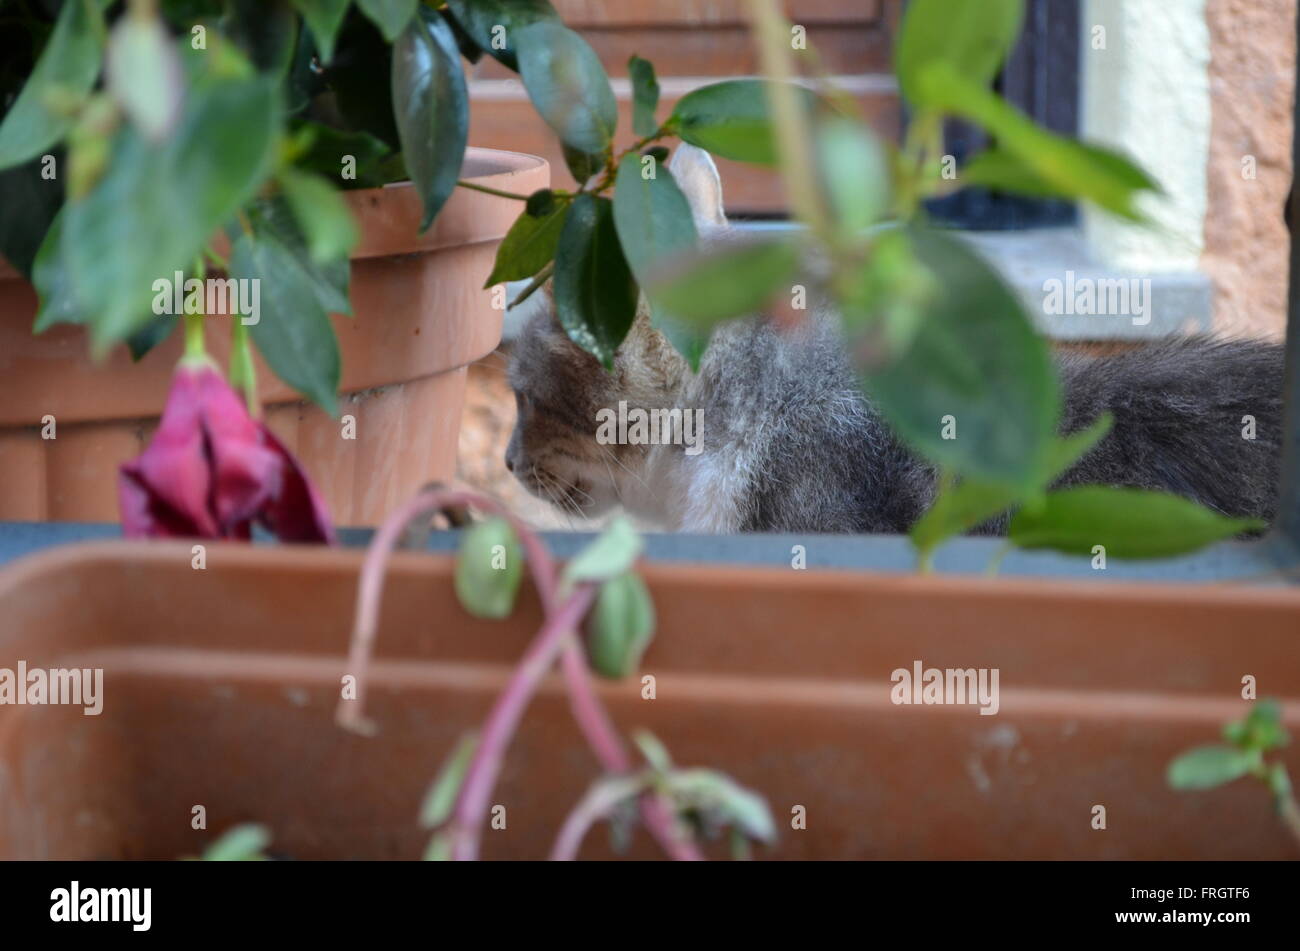 Pretty fluffy stray cat looking from behind a plant Stock Photo